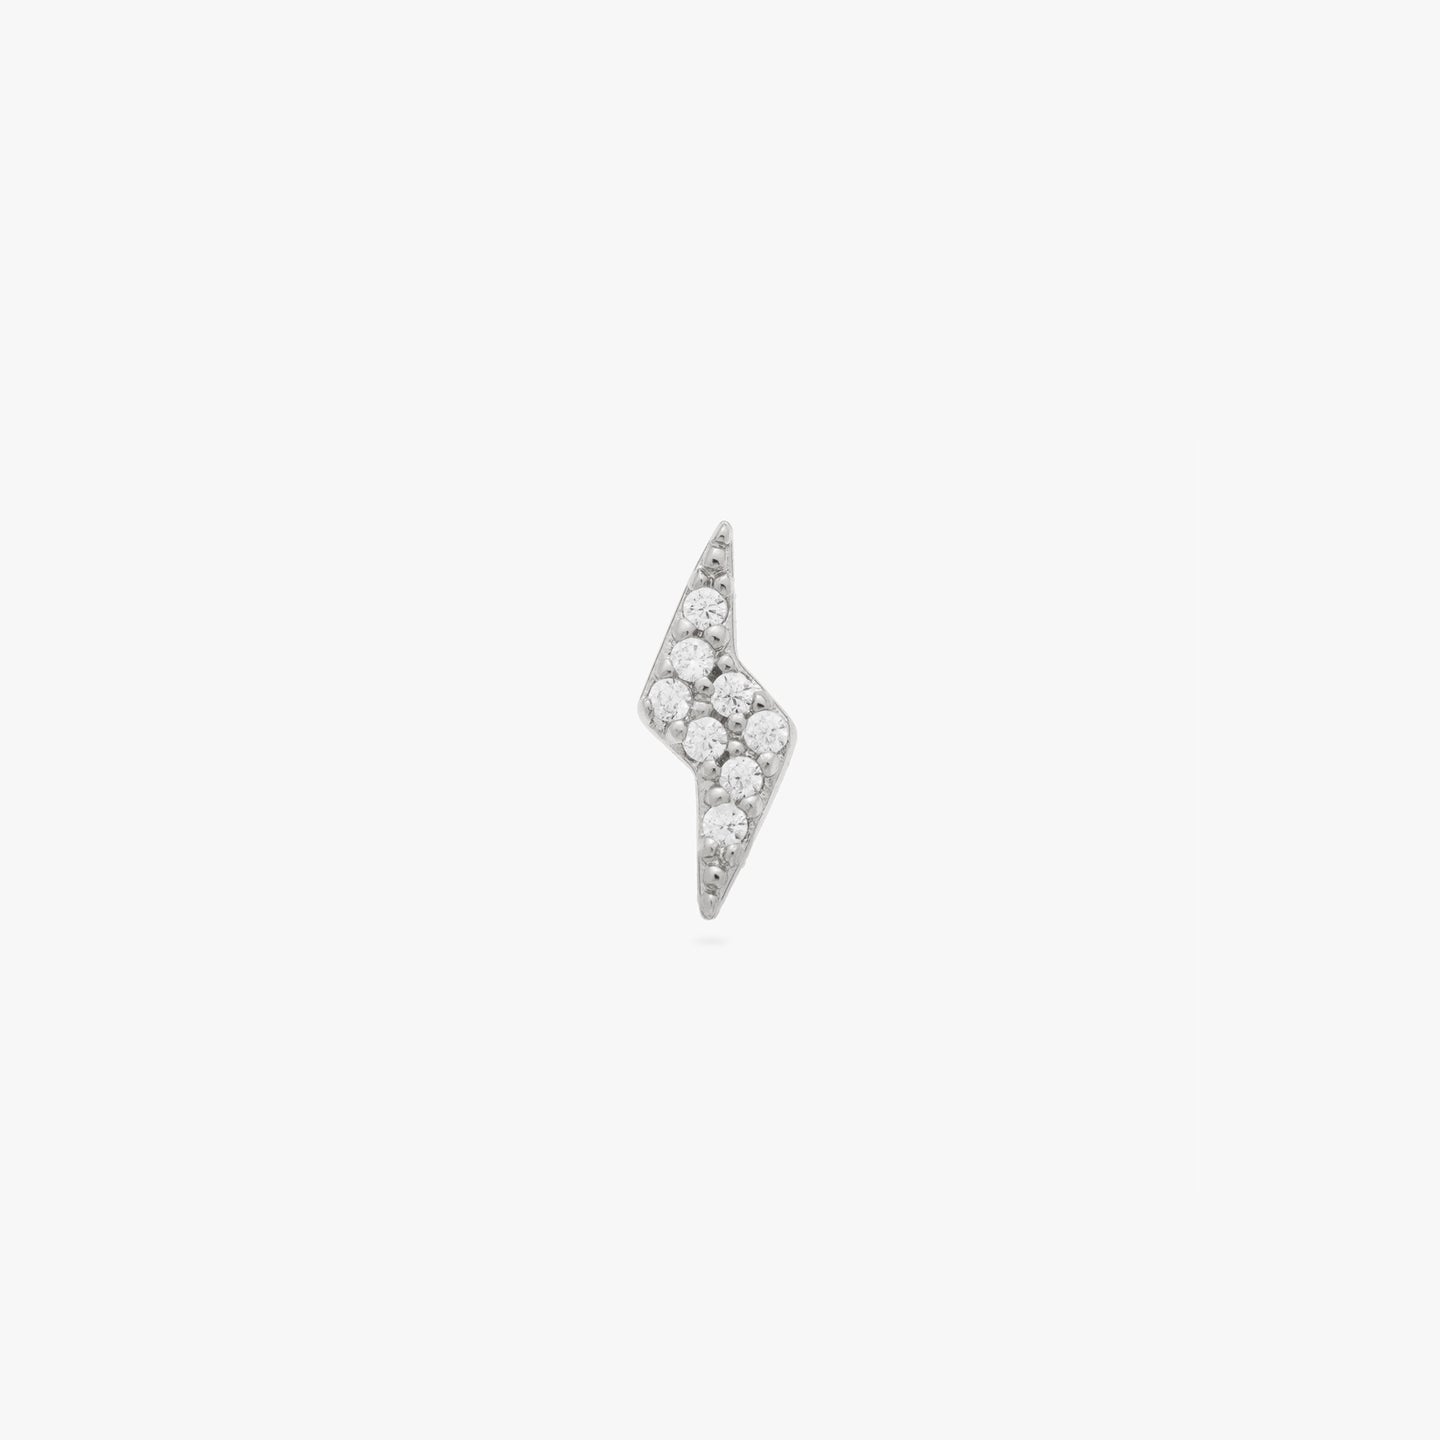 Reversible flatback stud with a Pave Lighting top with a star shaped flatback post color:null|silver/clear